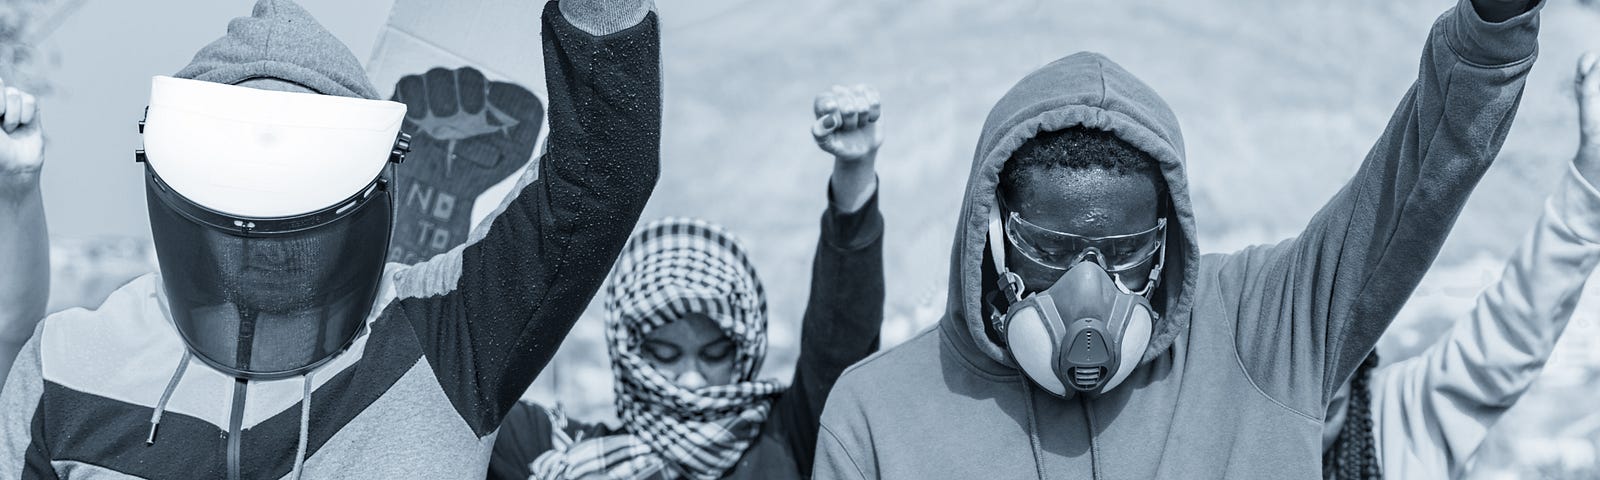 Monochrome image of activists raising fists as they protest.